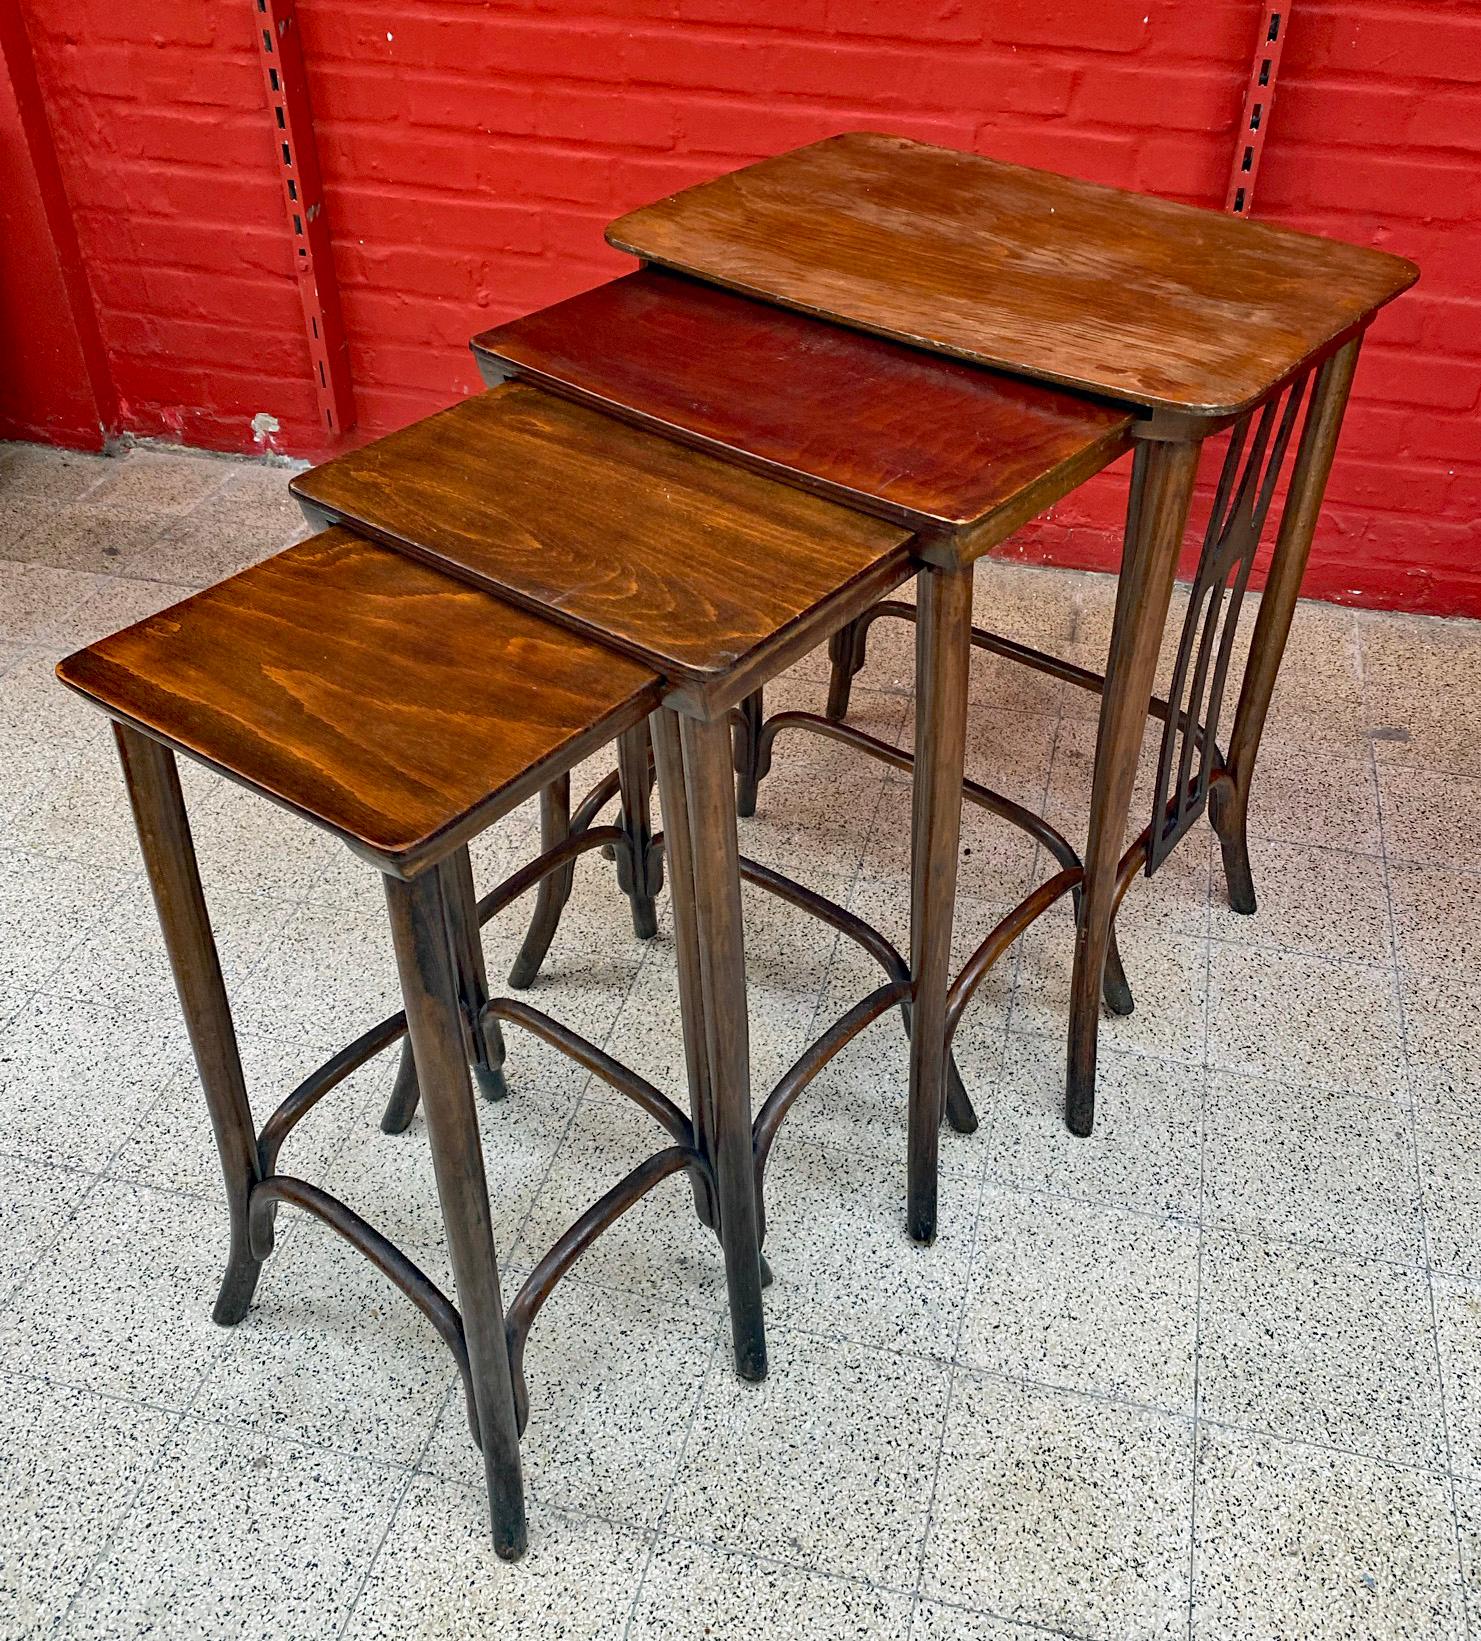 Kohn, 4 Viennese Secession nesting tables circa 1900
good condition, but patina has to be redone.